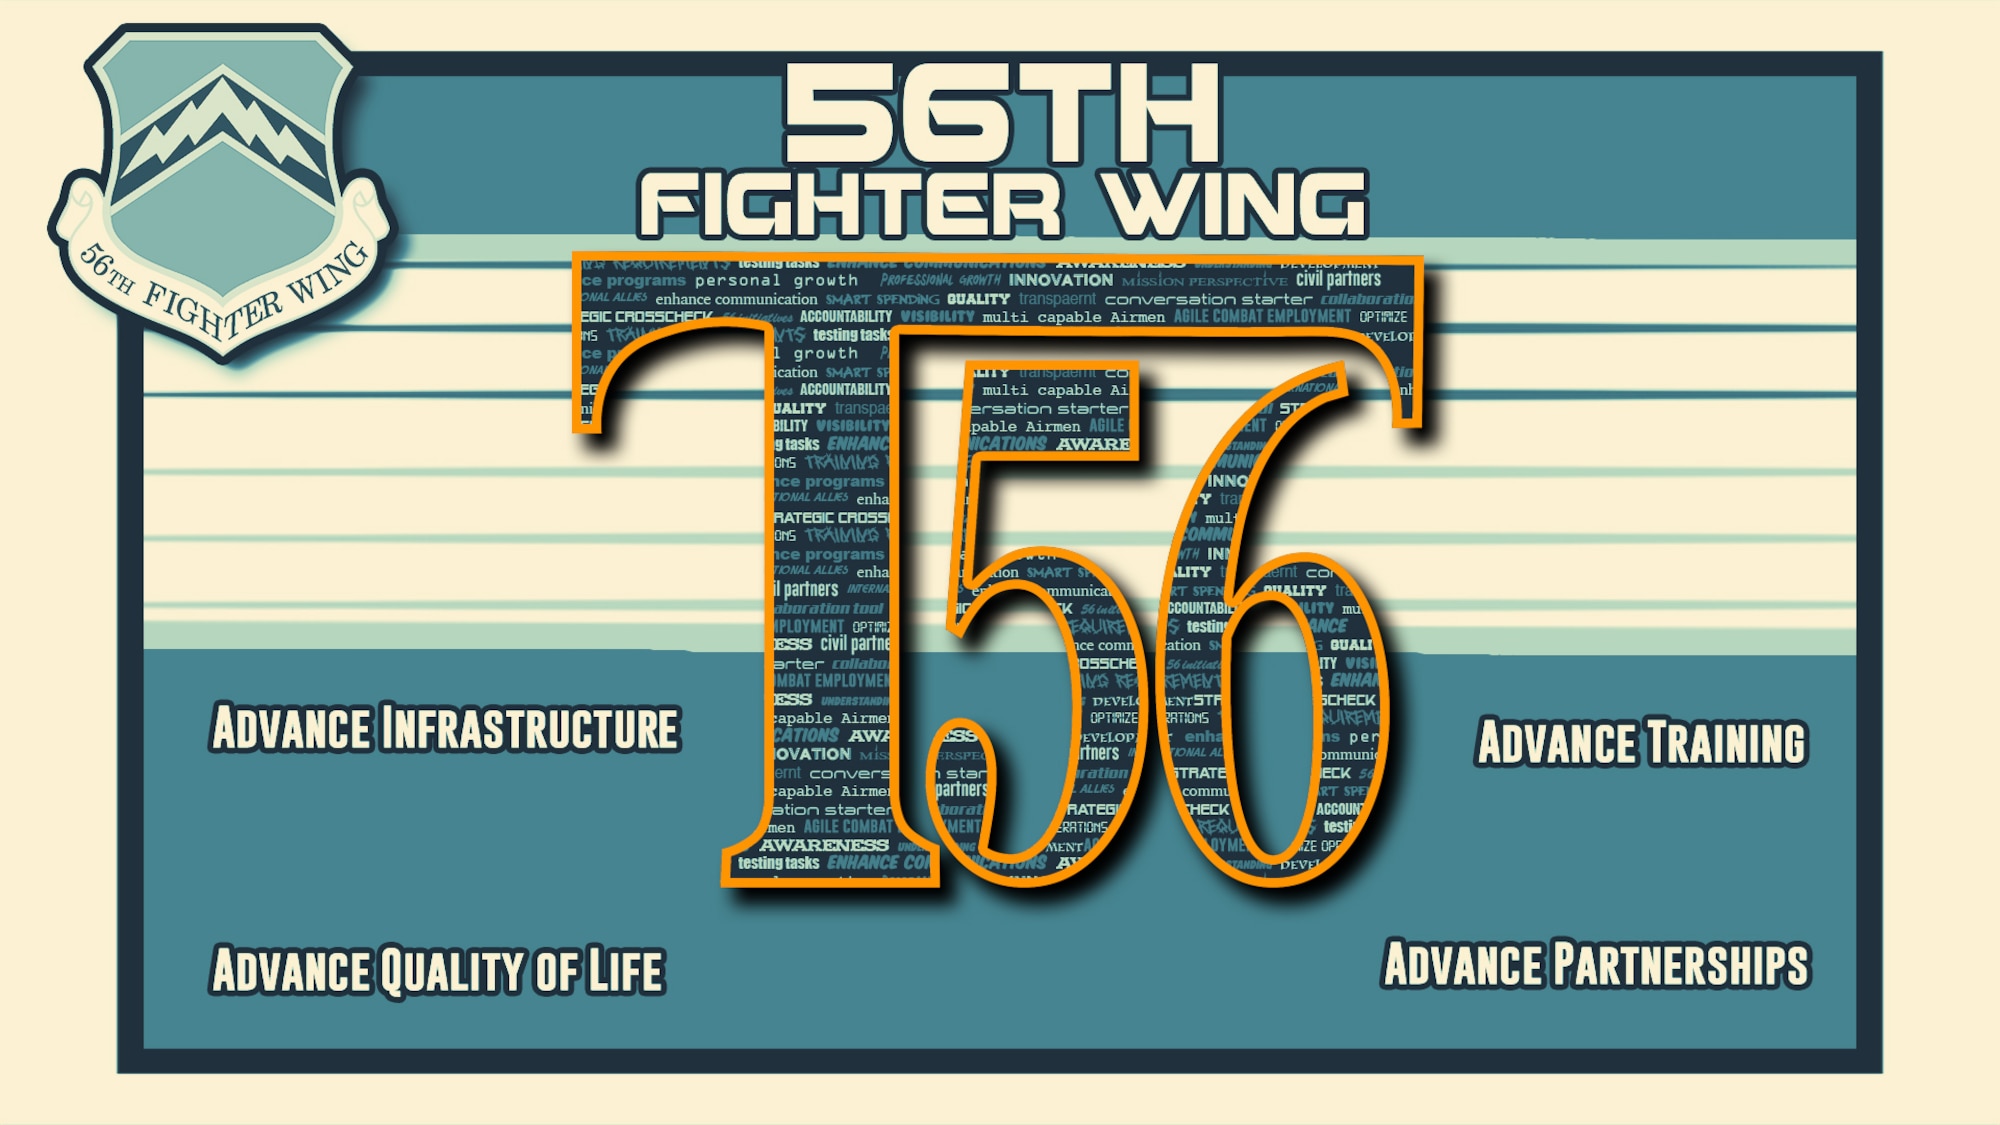 56th Fighter Wing leadership is proud to announce Thunderbolt 56.

Thunderbolt 56, or T56 is for short, is a base billboard that aligns up to 56 initiatives with the lines of effort and objectives of the Wing Strategy.